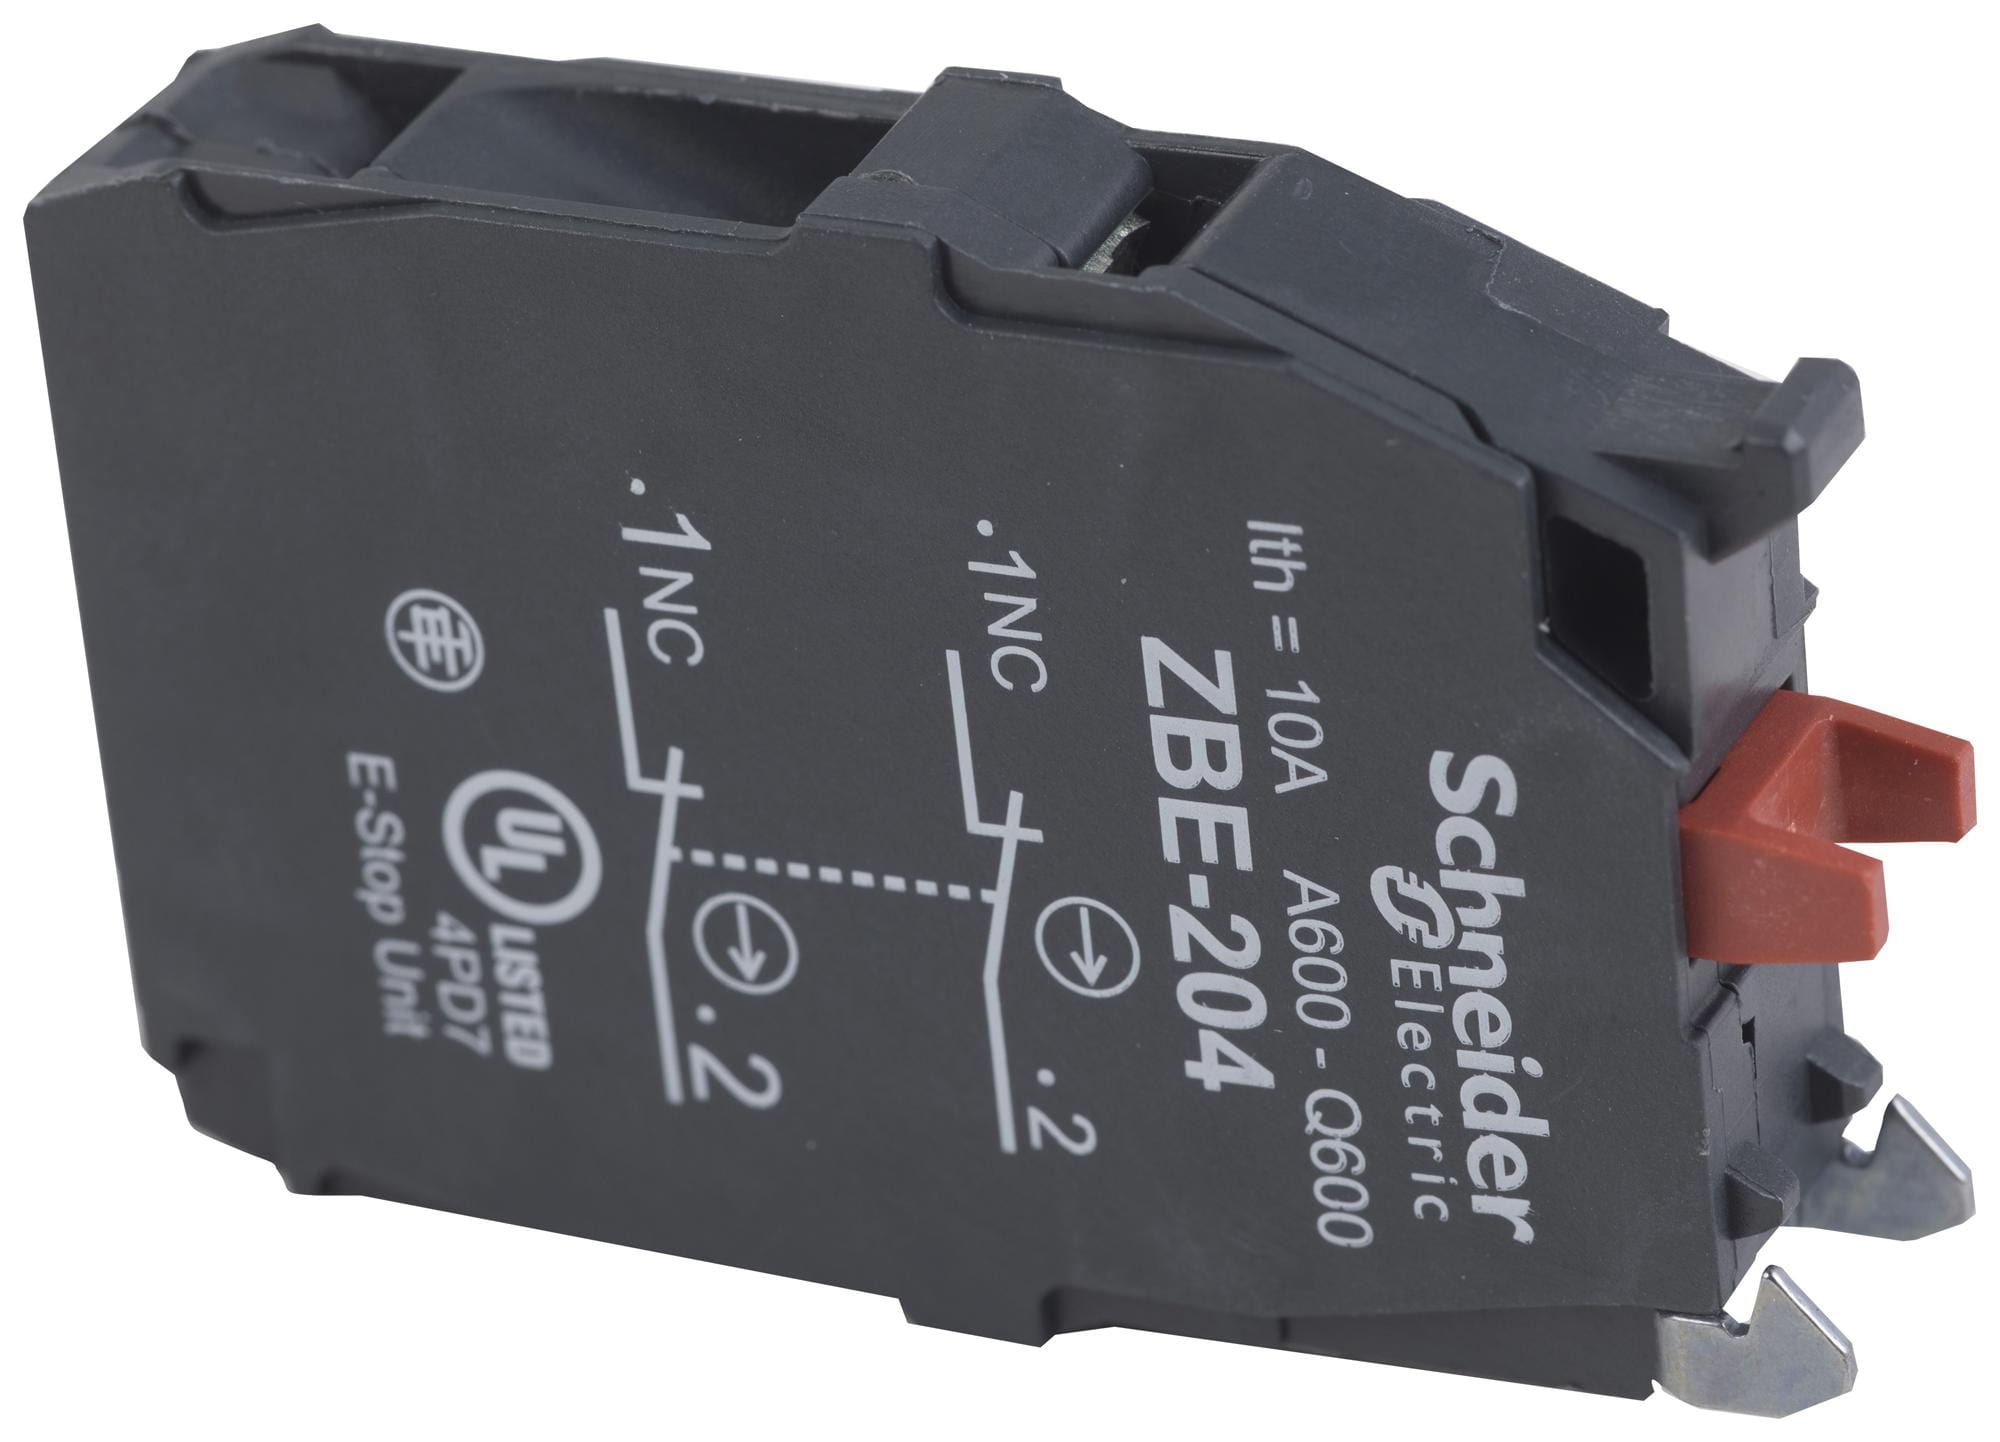 SCHNEIDER ELECTRIC Contact Blocks ZBE504 CONTACT BLOCK, 1.1A, 125V, CLAMP SCHNEIDER ELECTRIC 3114925 ZBE504